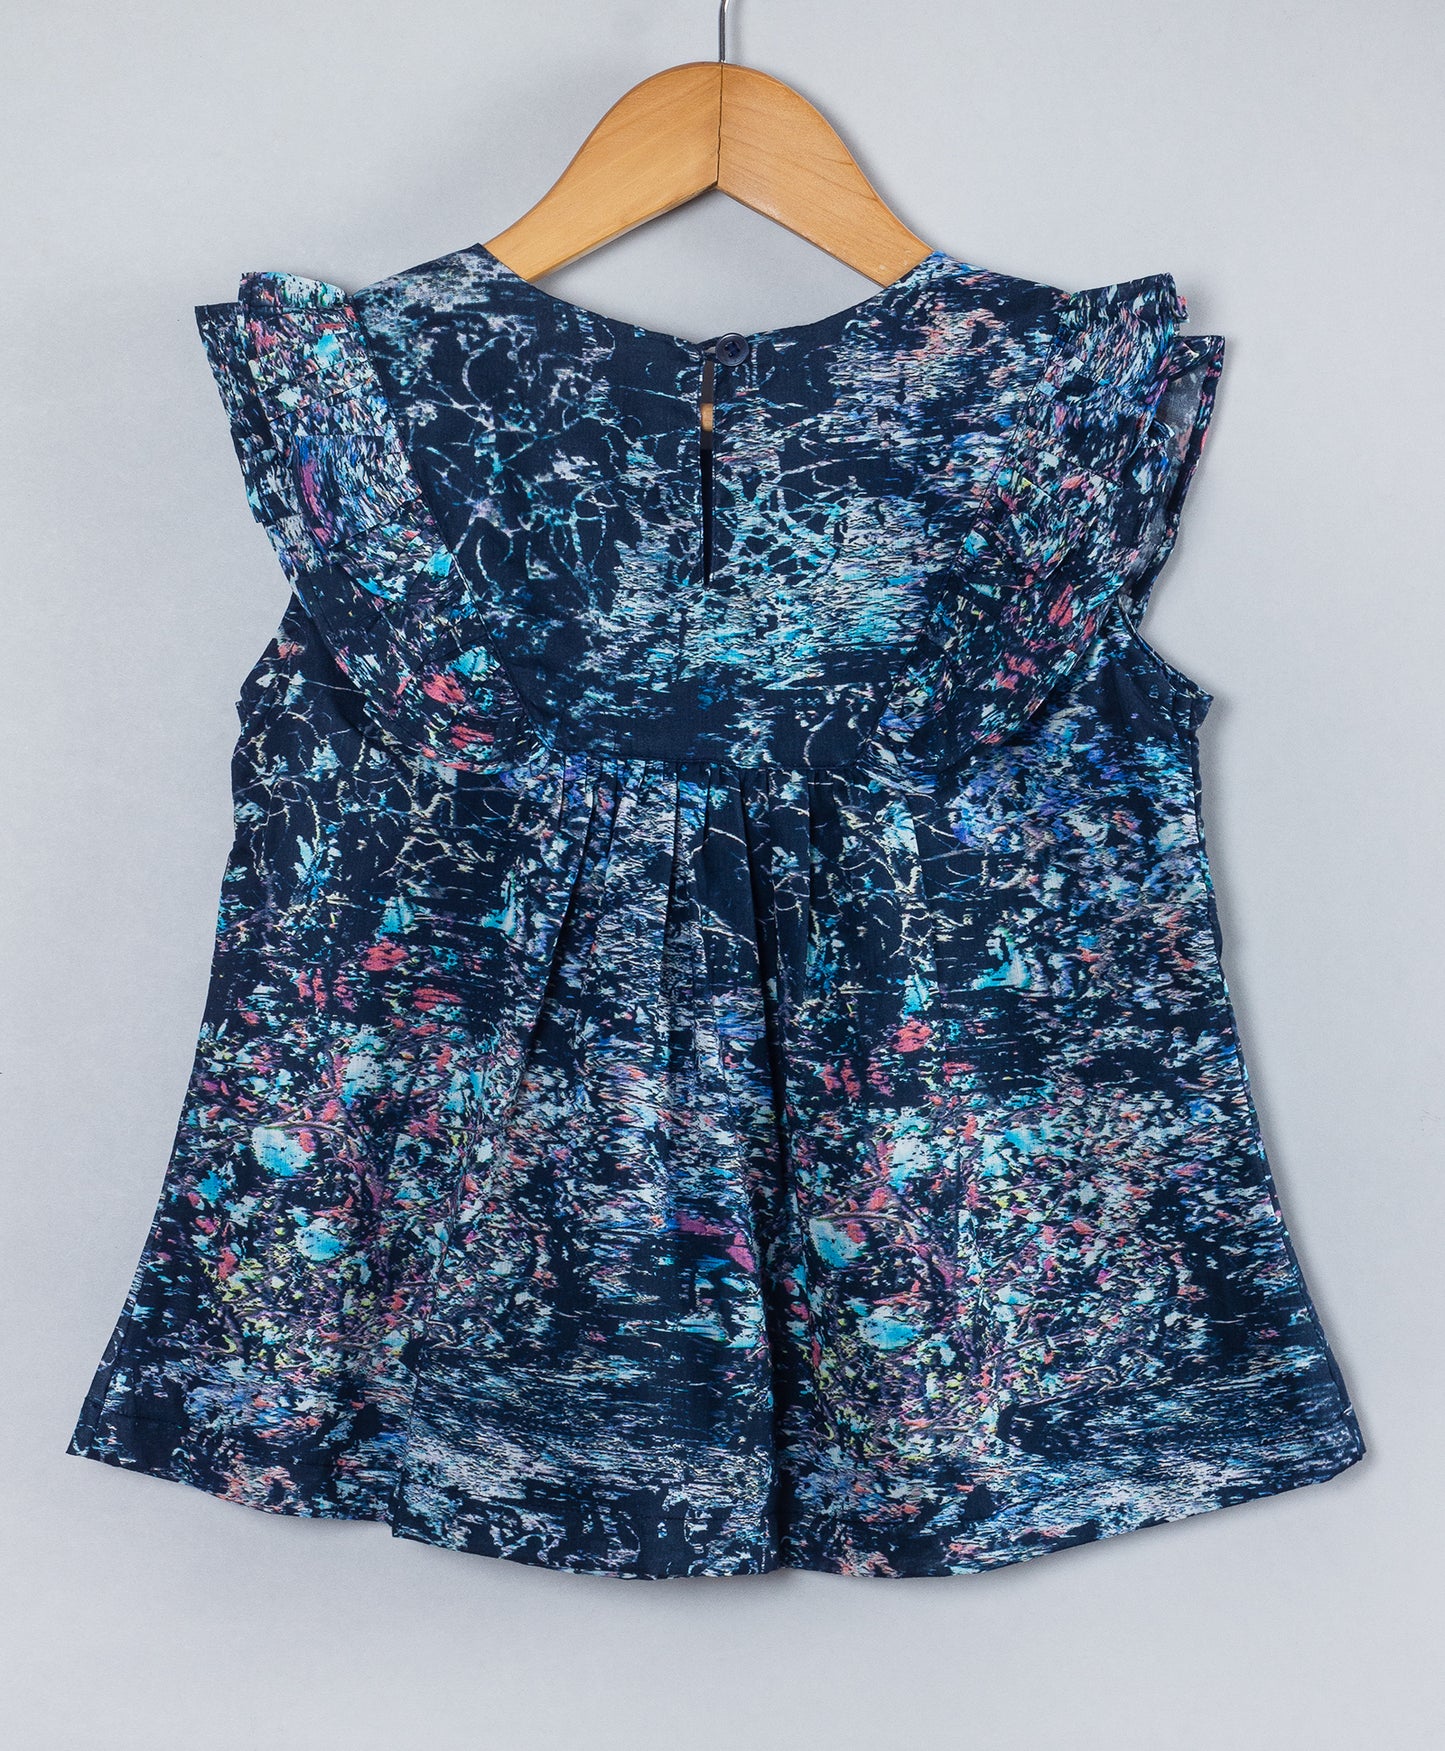 NAVY ALL OVER CHERRY BLOSSOM PRINT TOP WITH FRILL ALONG THE YOKE